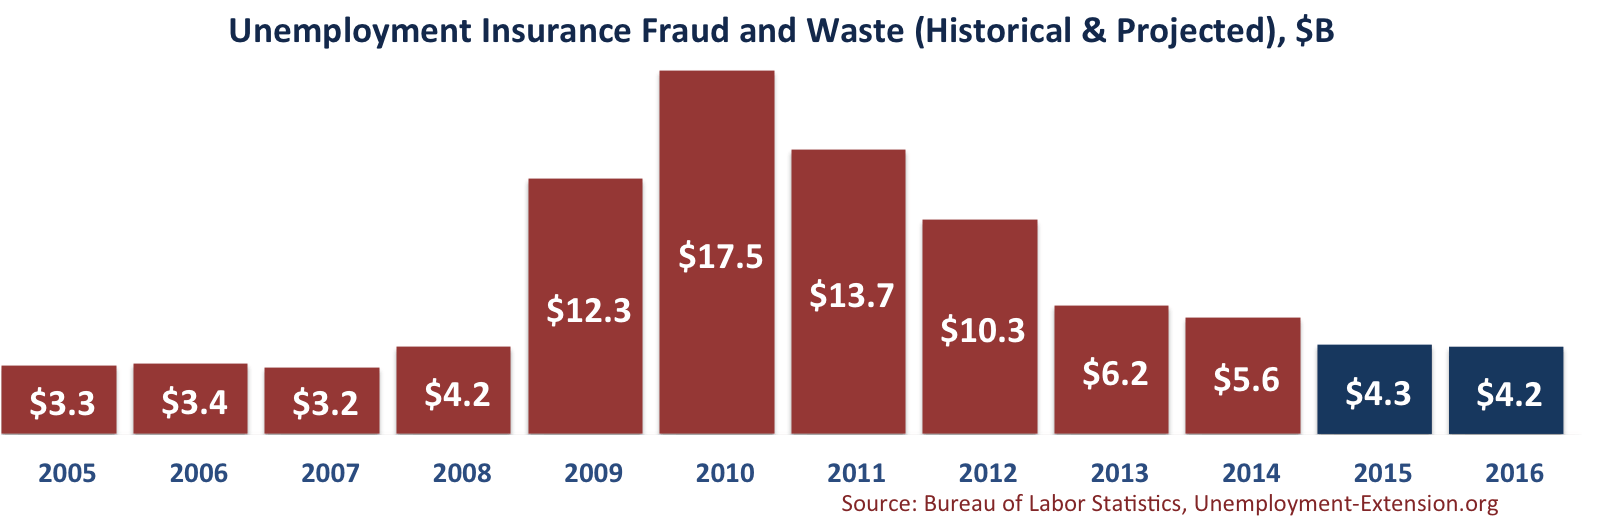 Unemployment Insurance Fraud and Waste (Historical & Projected) in April 2015